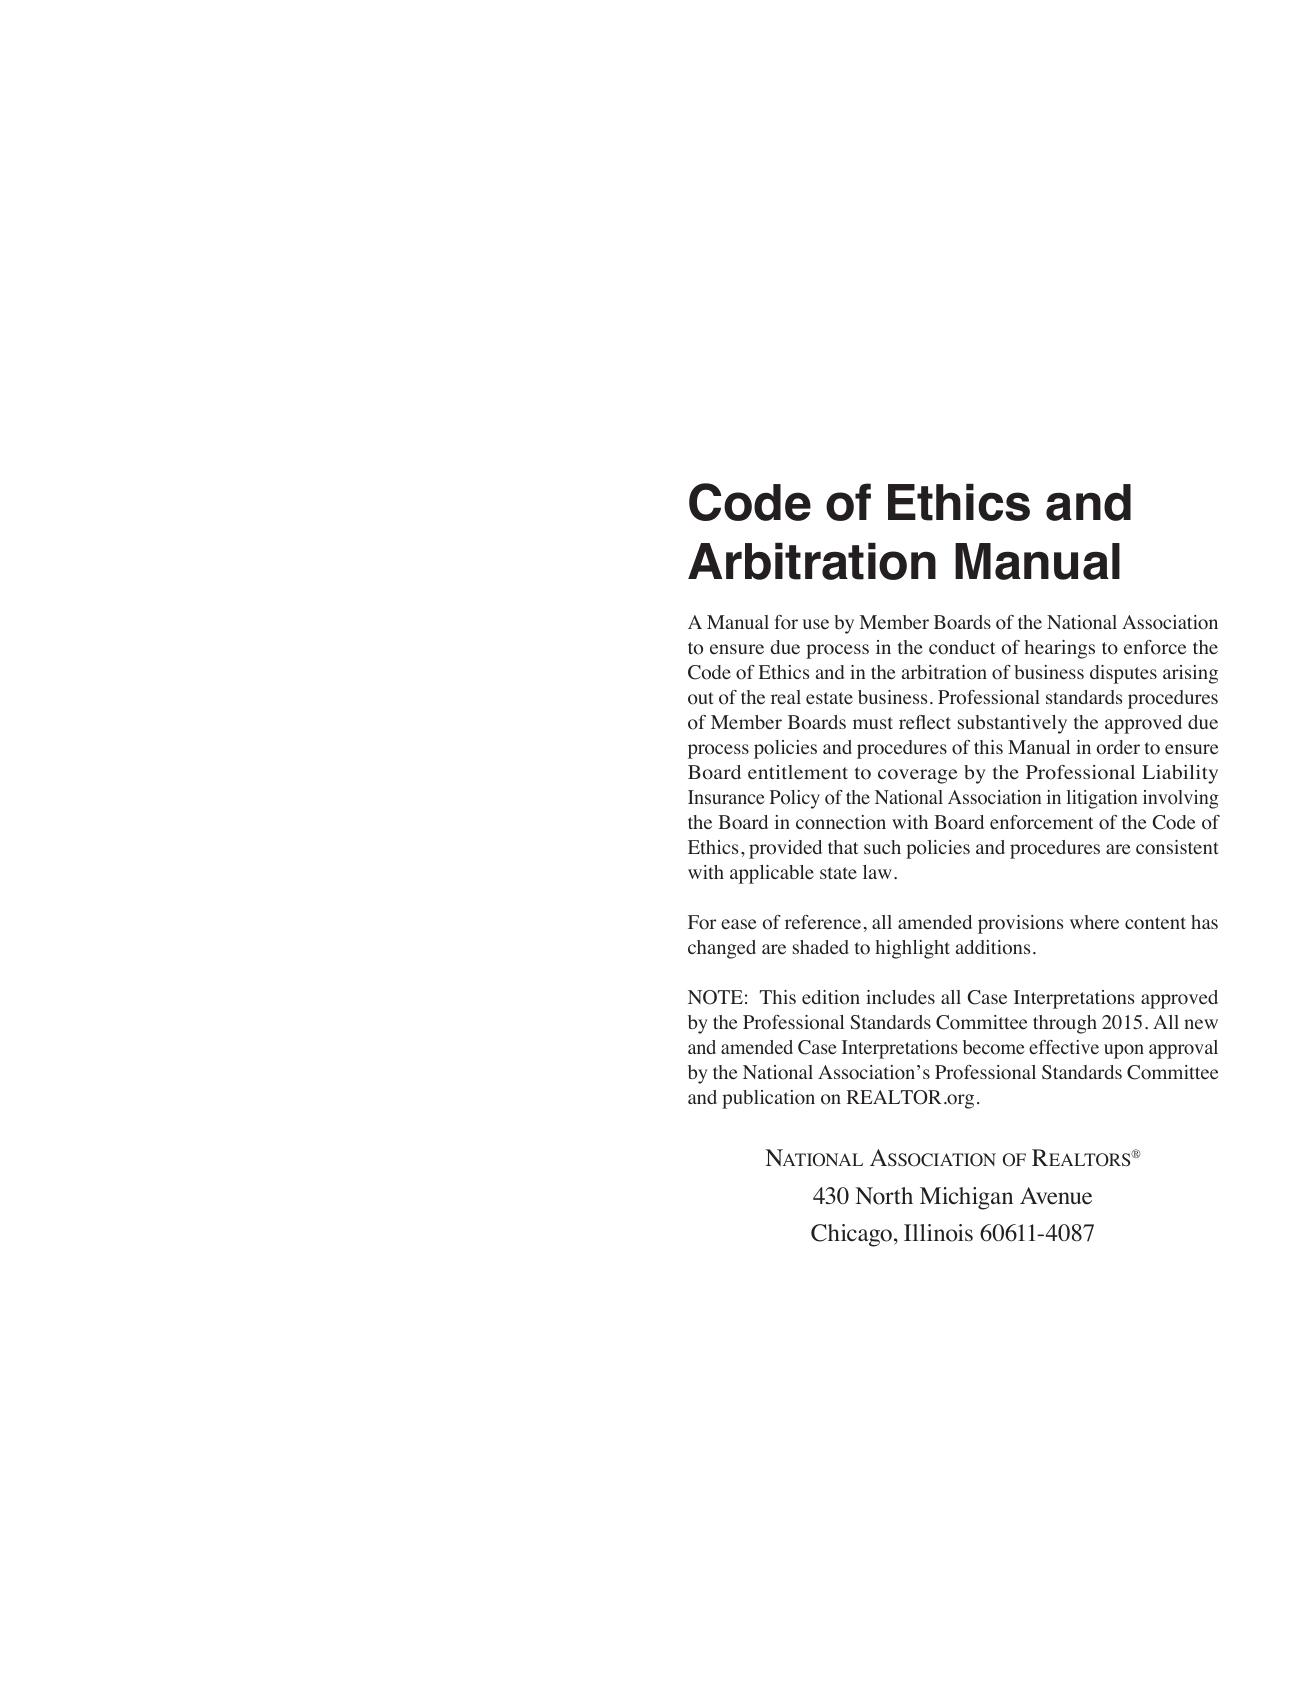 Code of Ethics and Arbitration Manual 2016